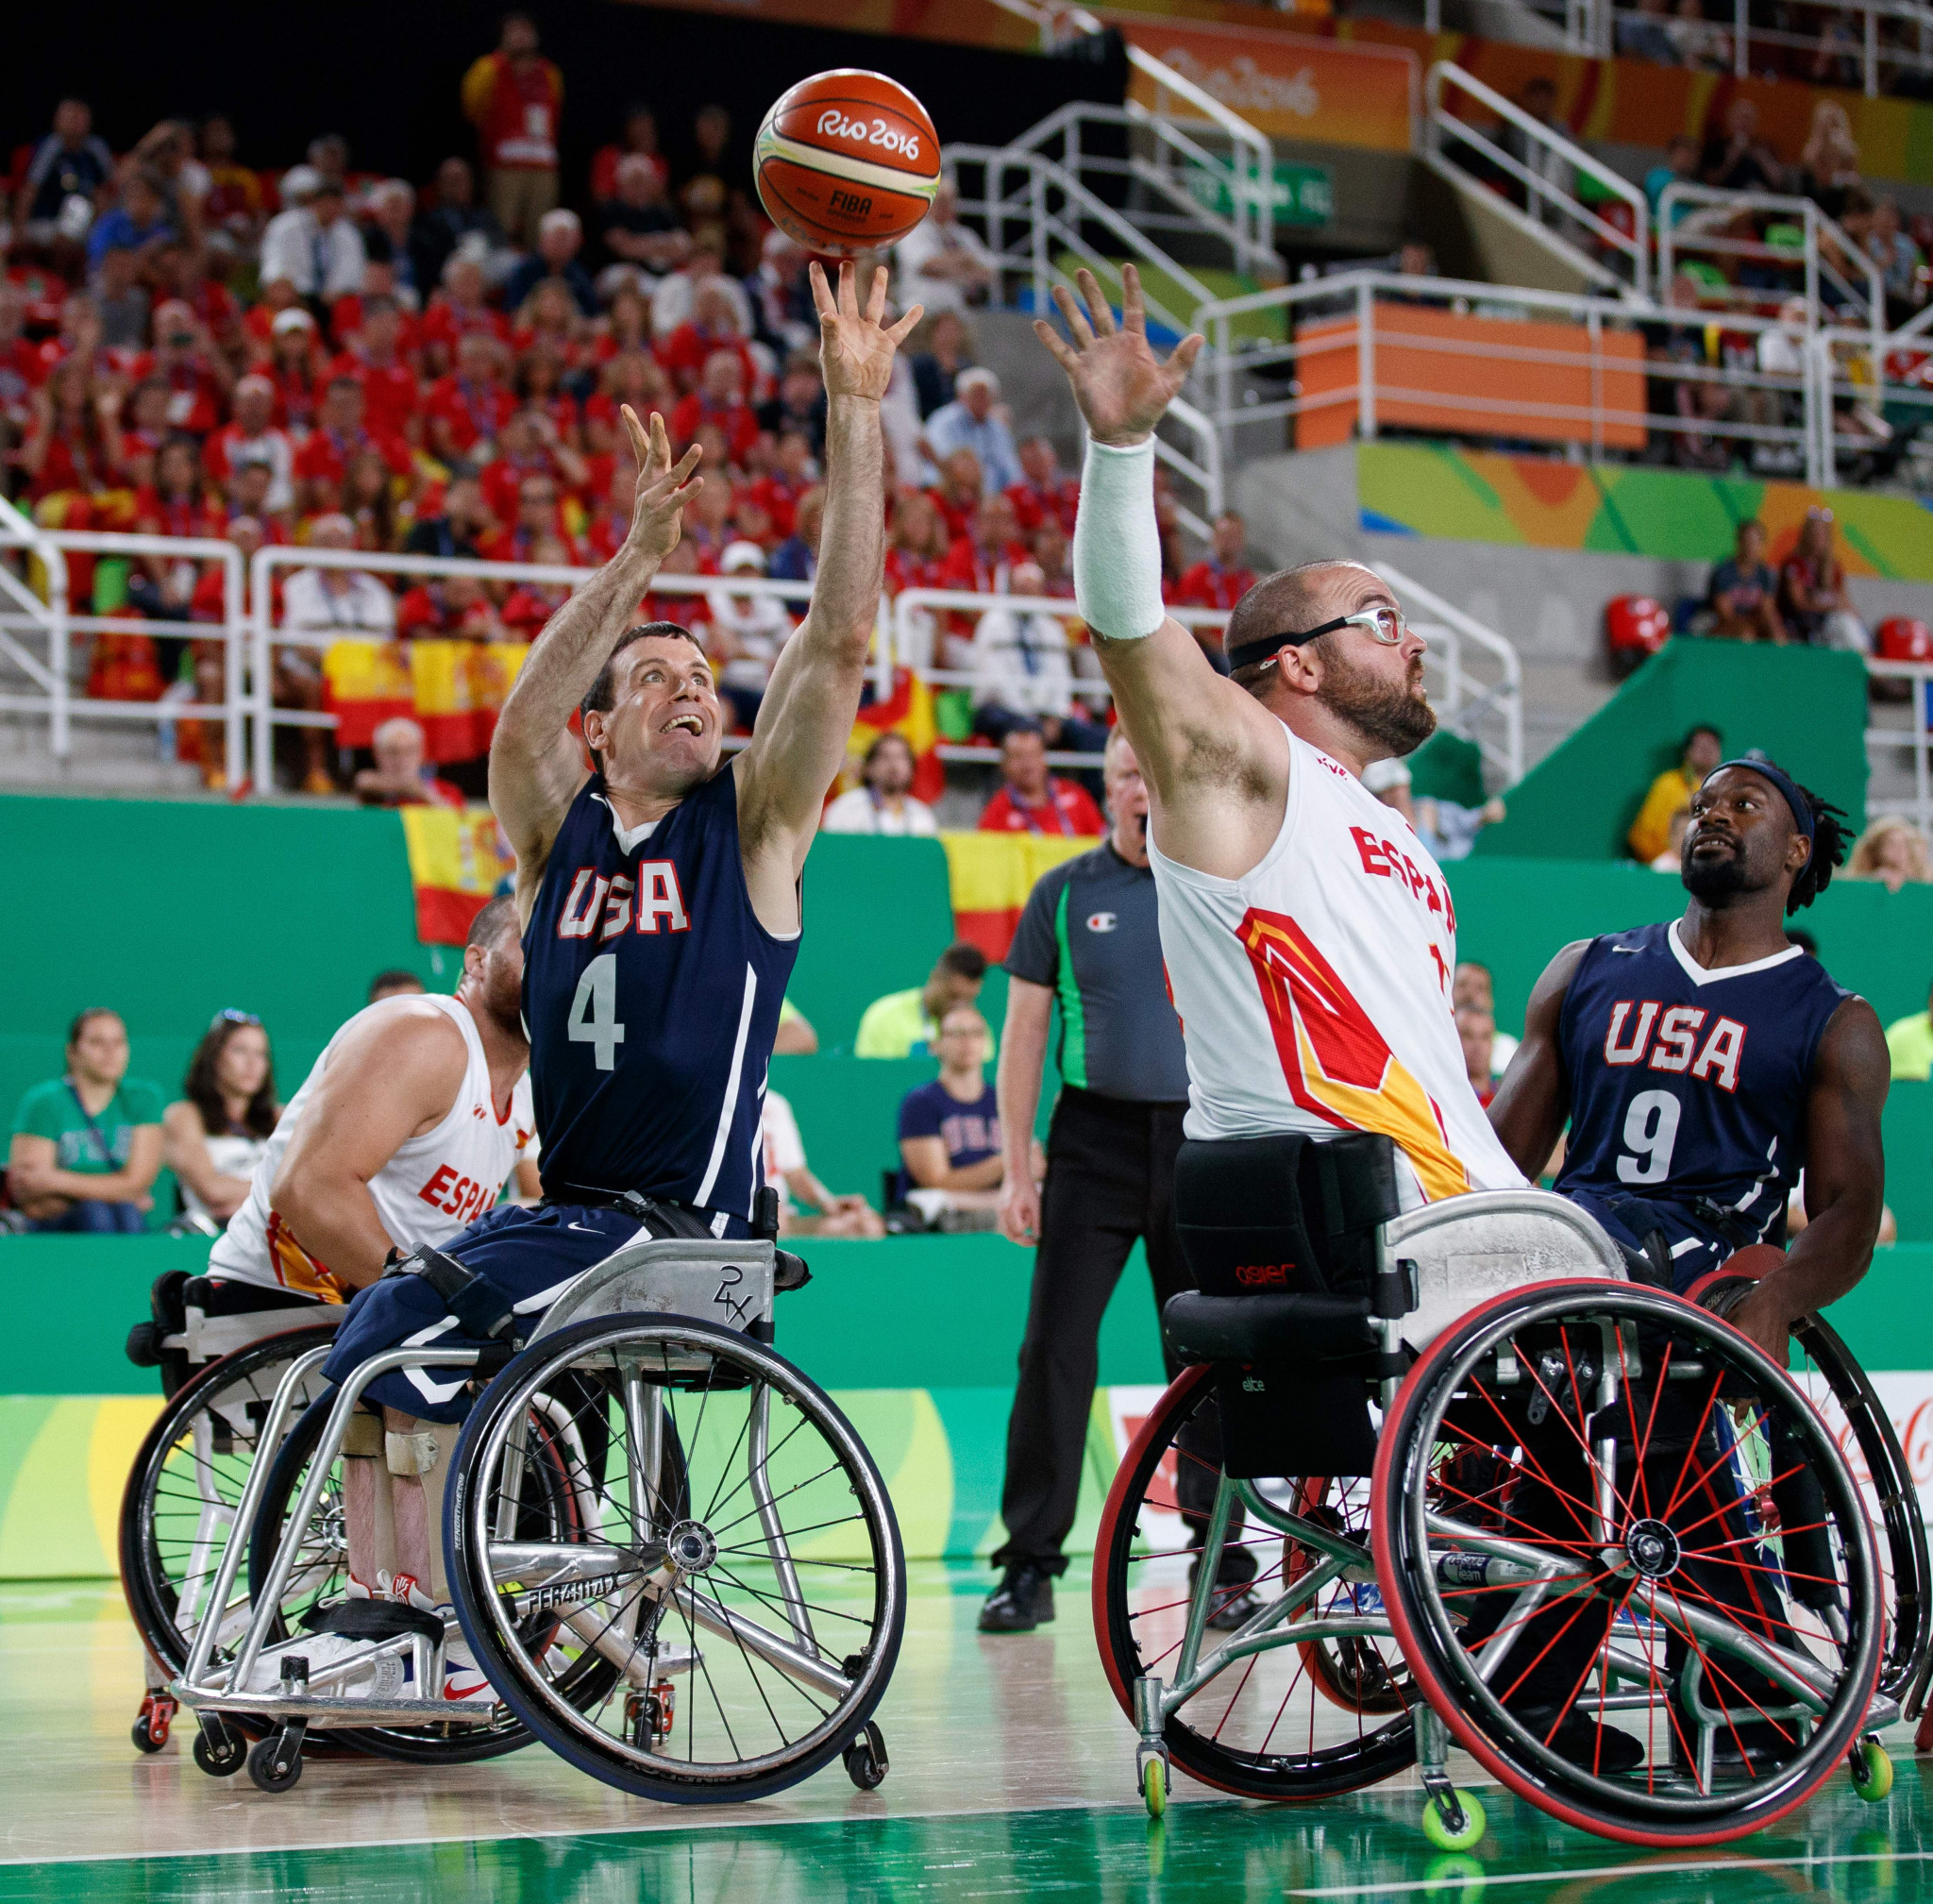 People can apply for up to 30 tickets as their first choice in the lottery for the 2020 Paralympic Games ©Getty Images